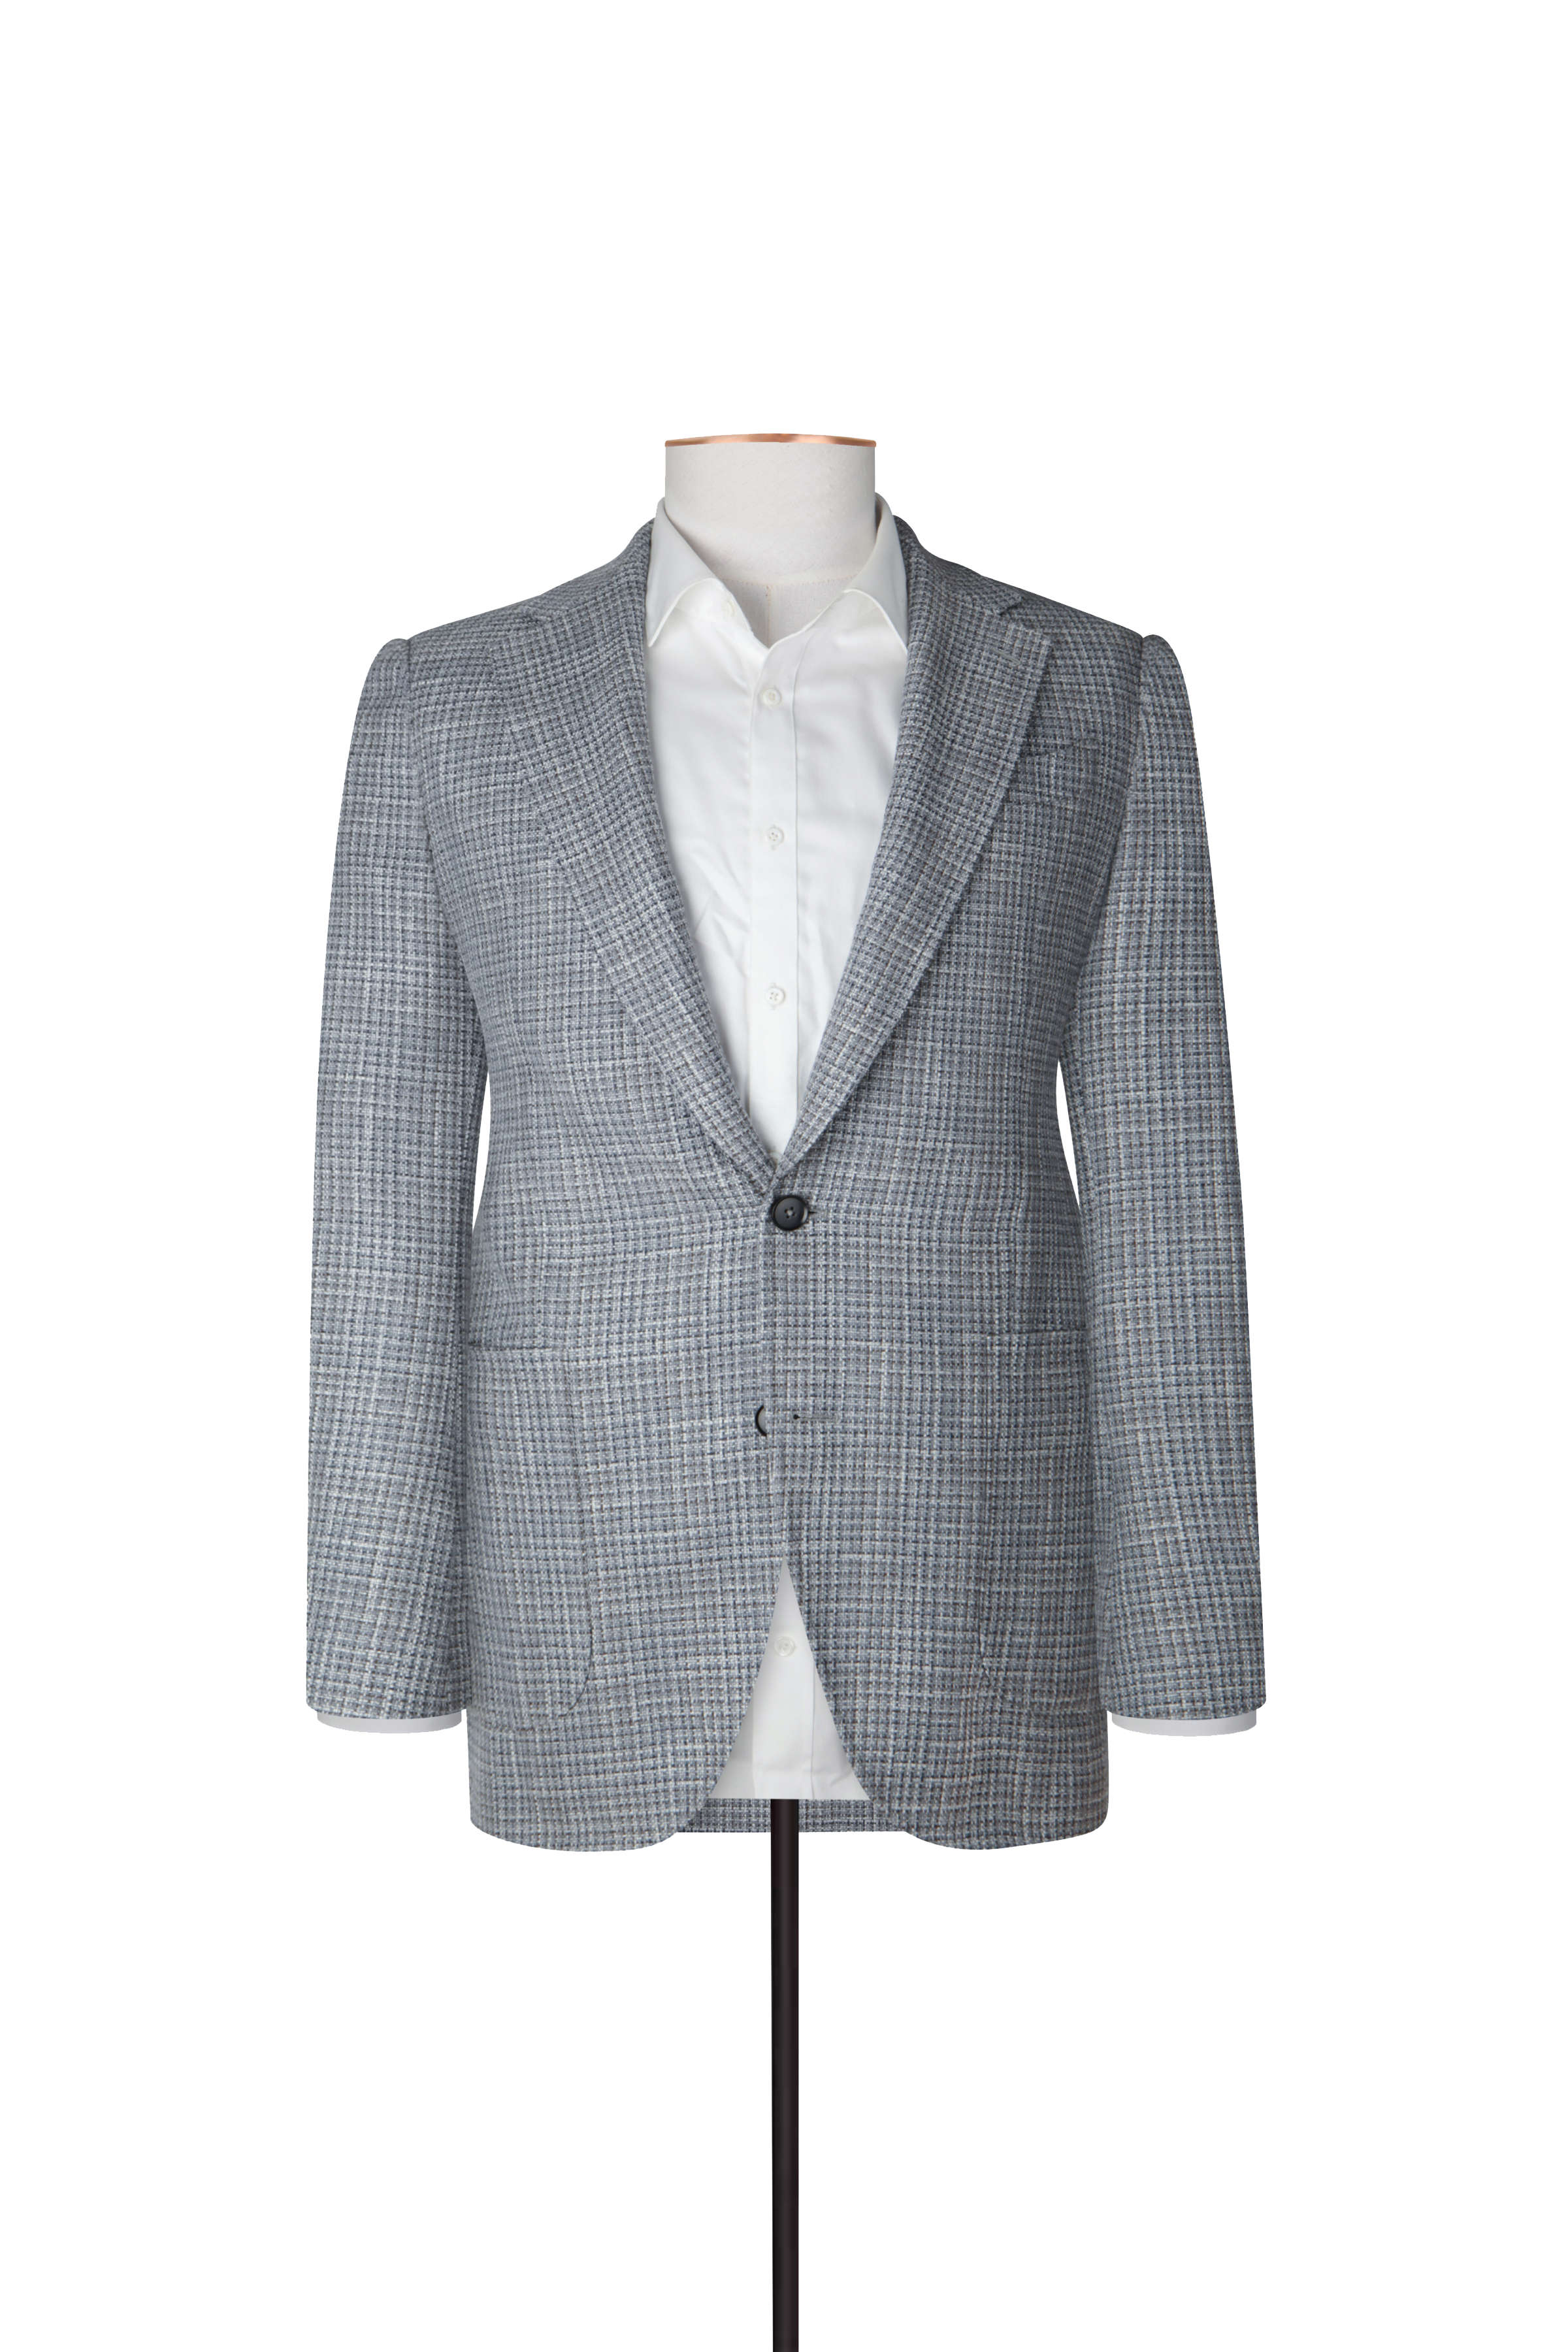 Loro Piana Grey & Neutral Plaid Suit by Knot Standard